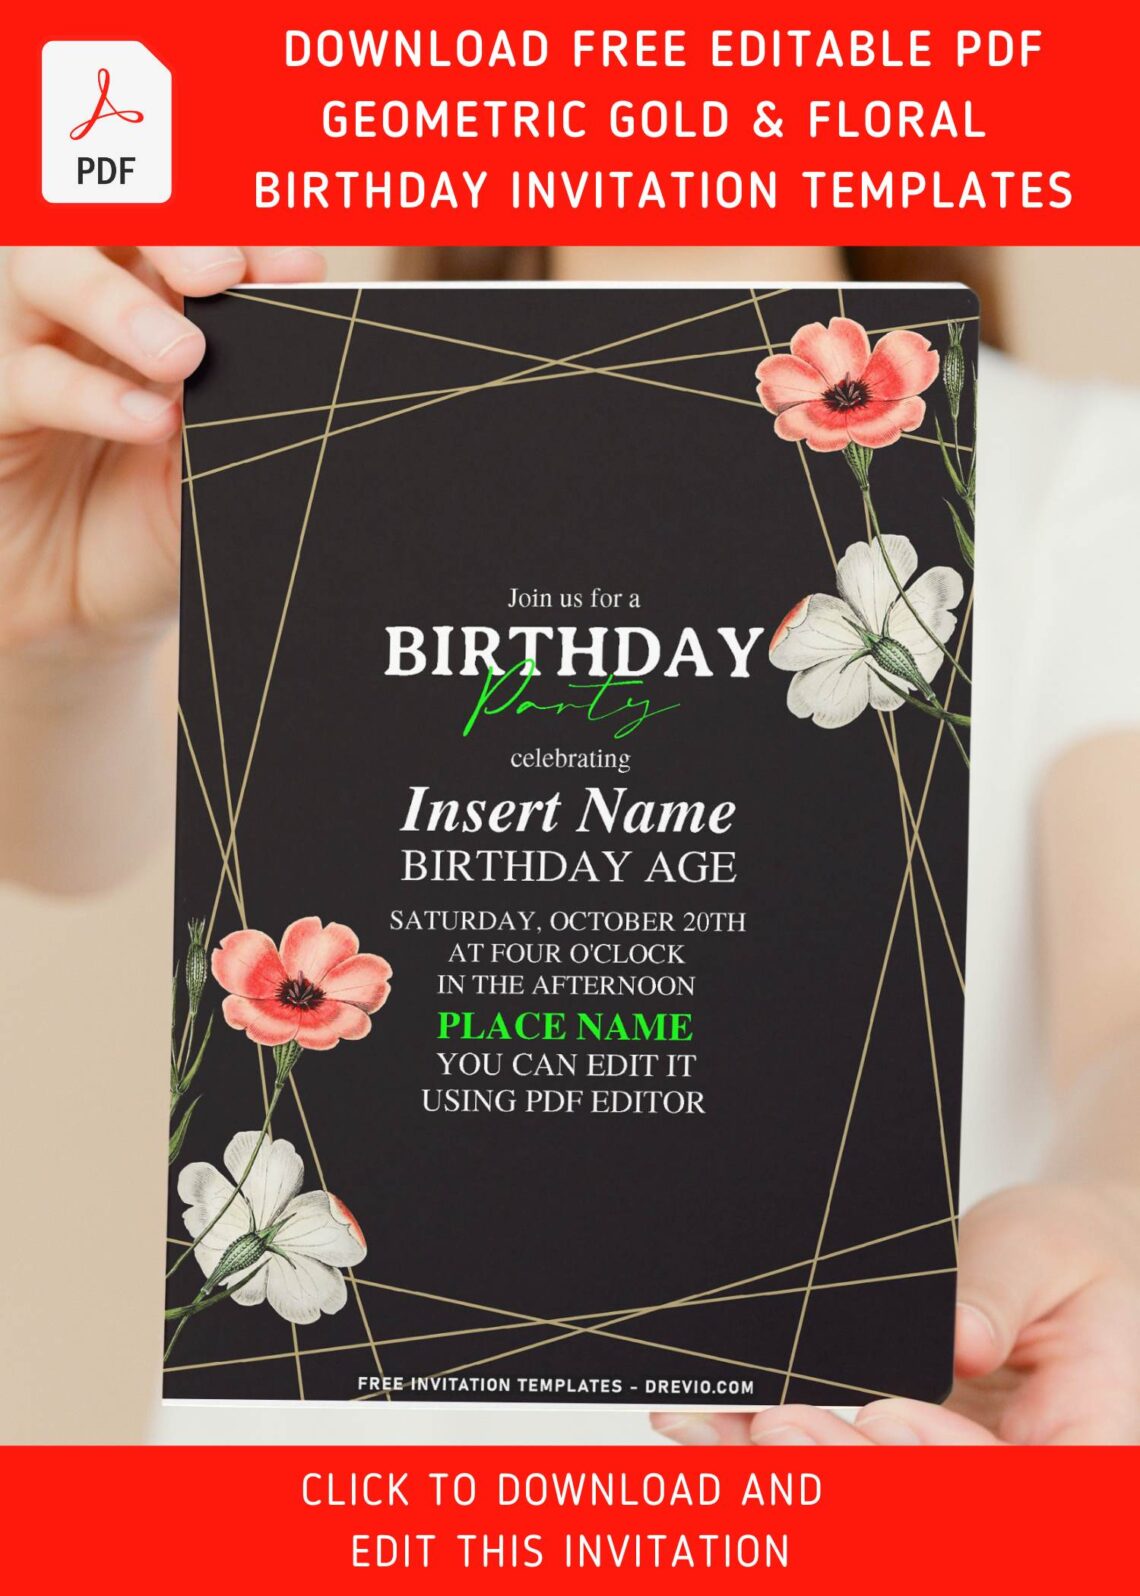 (Free Editable PDF) Glamorous Gold Geometric And Floral Birthday Invitation Templates with editable text